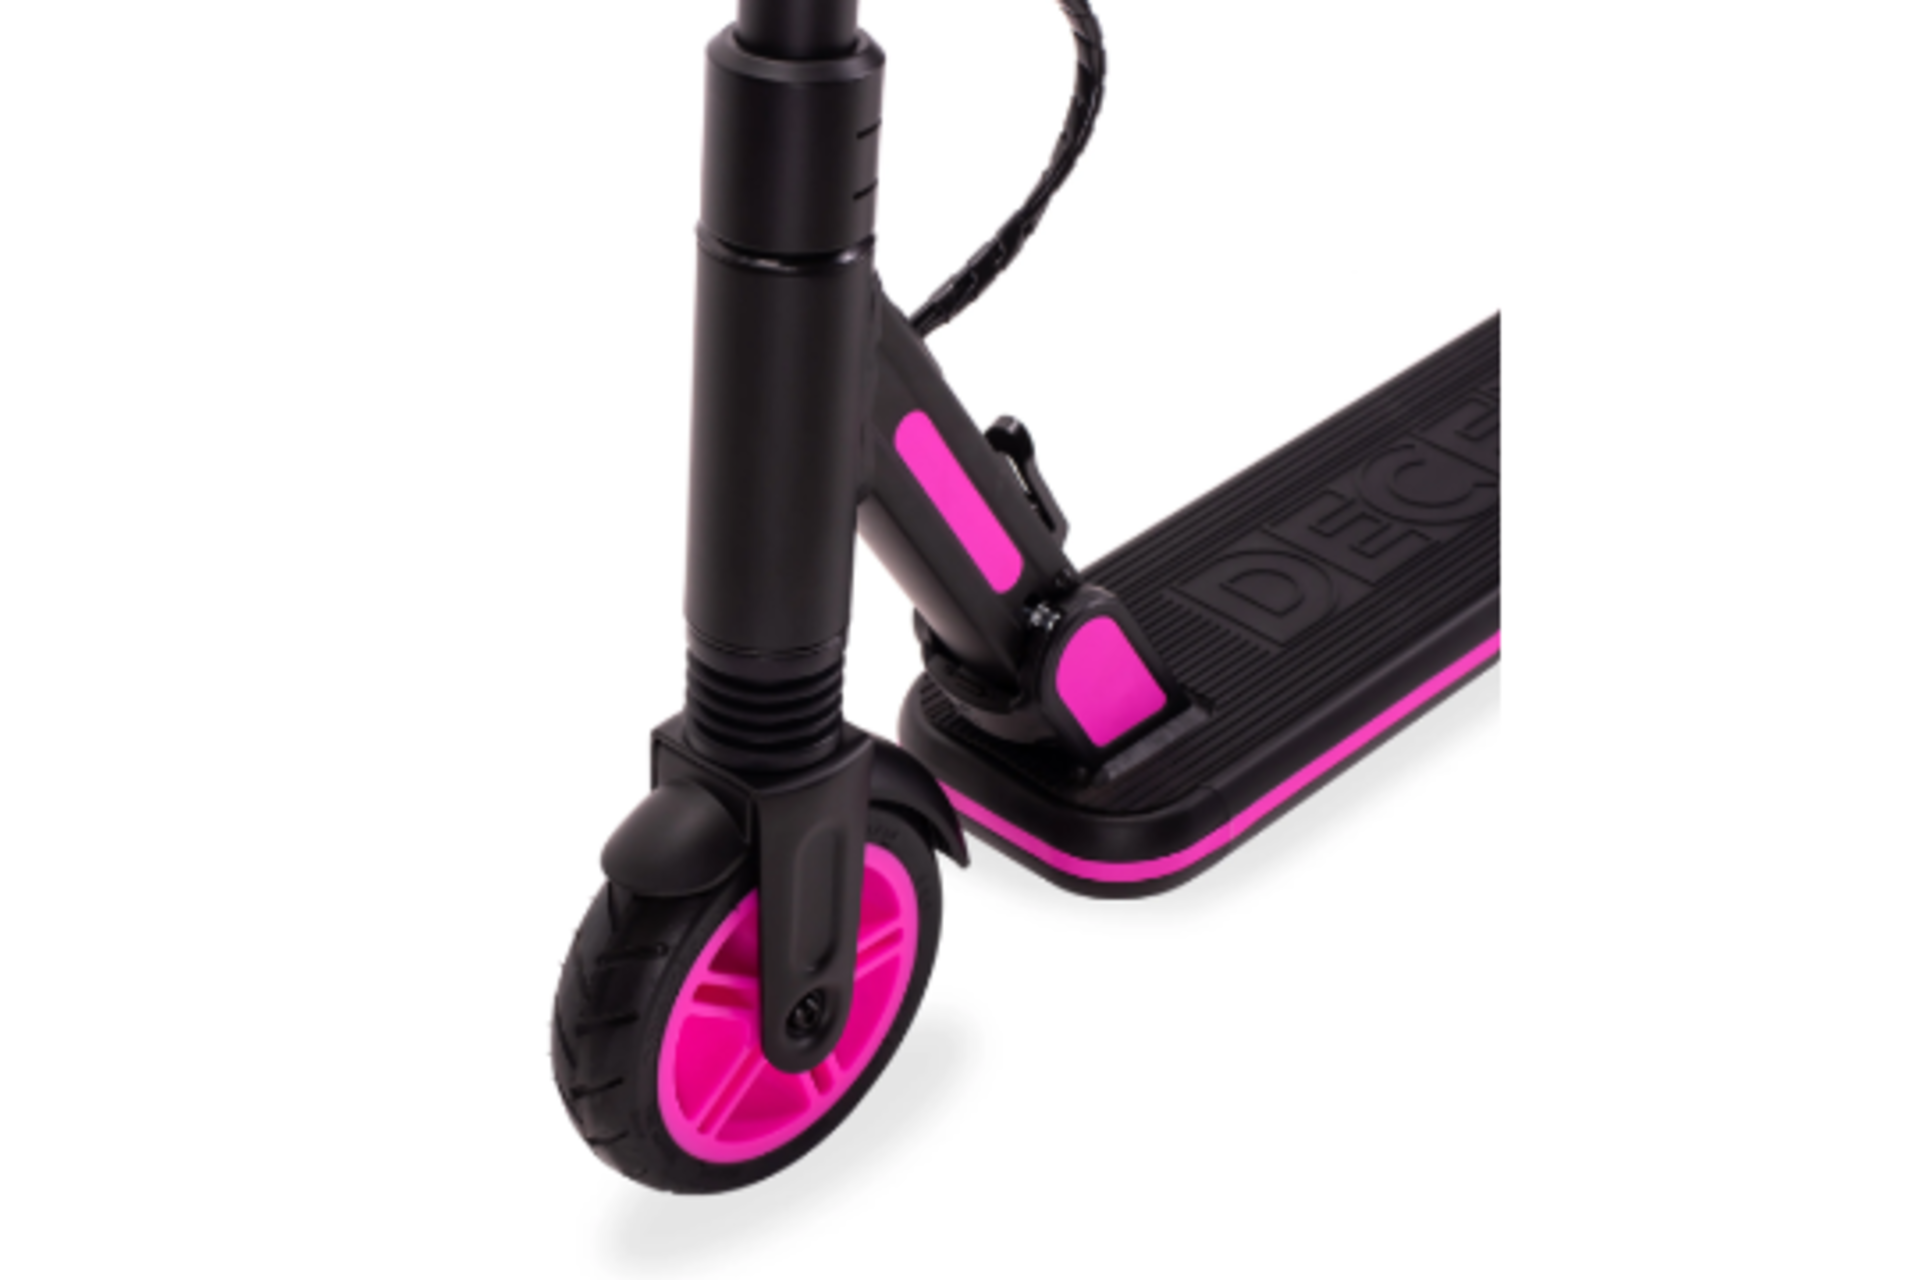 Trade Lot 10 x New &Boxed DECENT Kids Electric Scooter - Black/Pink. Let your kids zip around in - Image 3 of 3